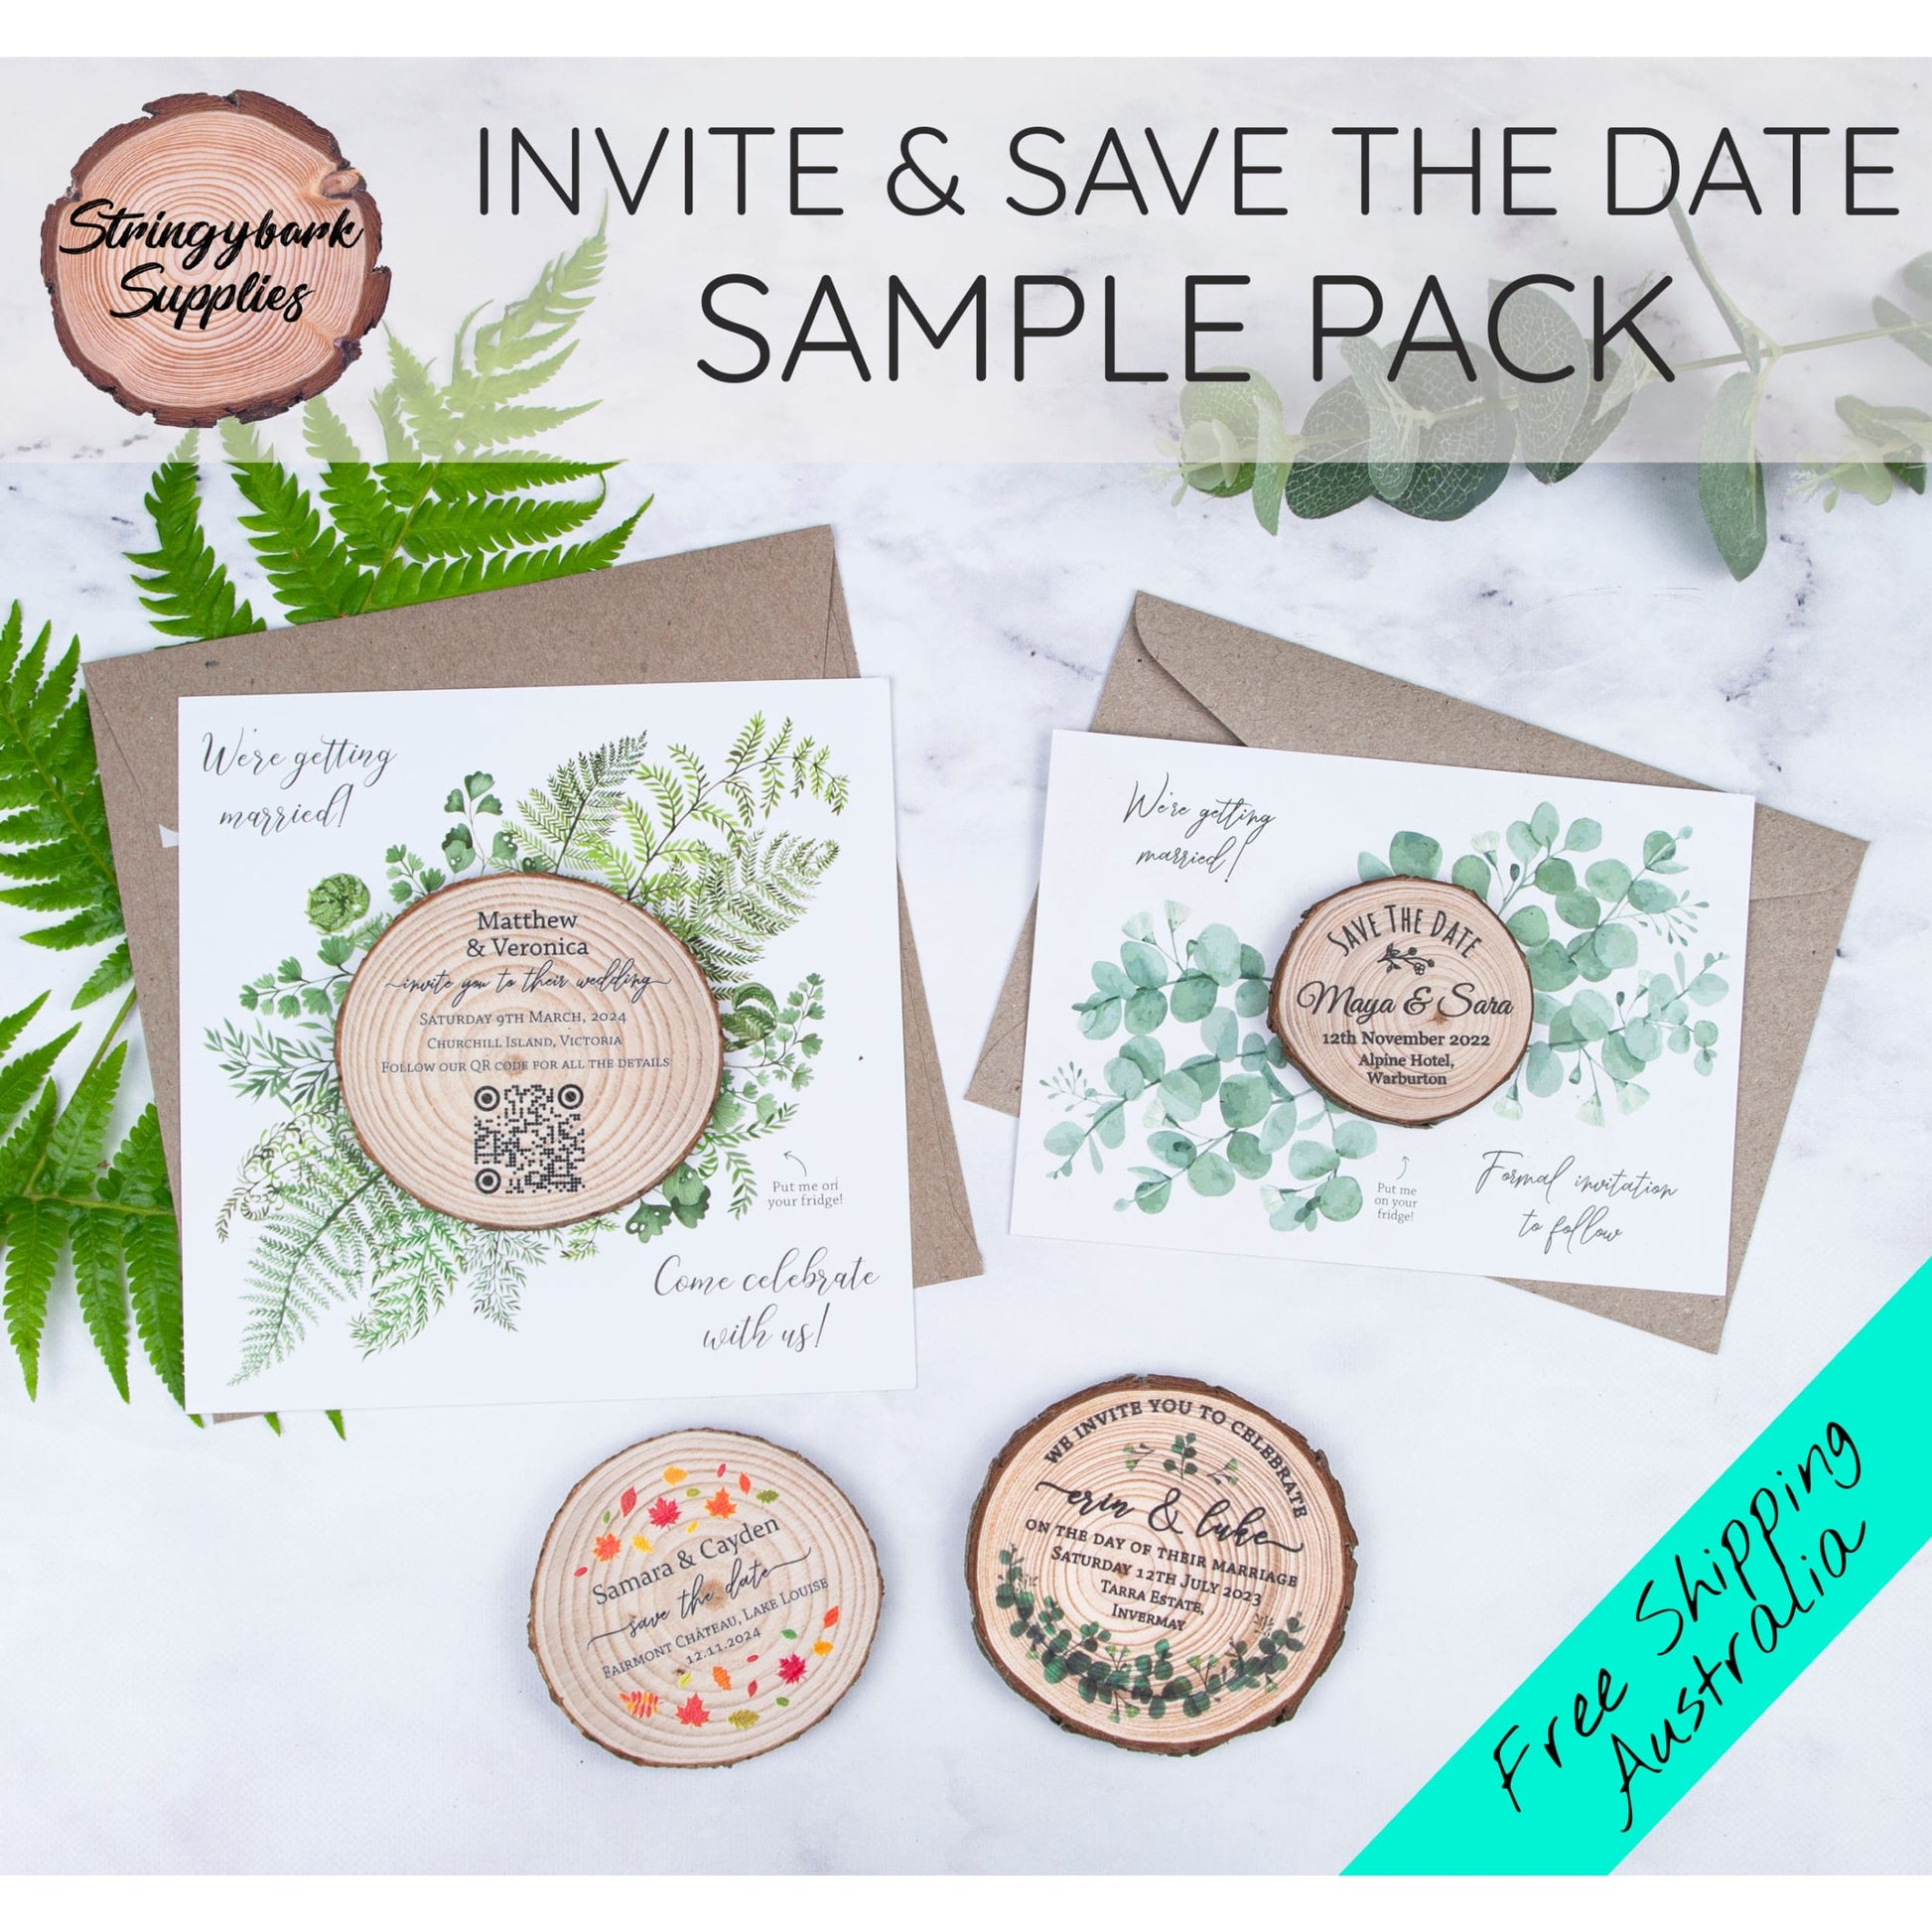 Invite & Save the Date Sample Pack - Save the dates